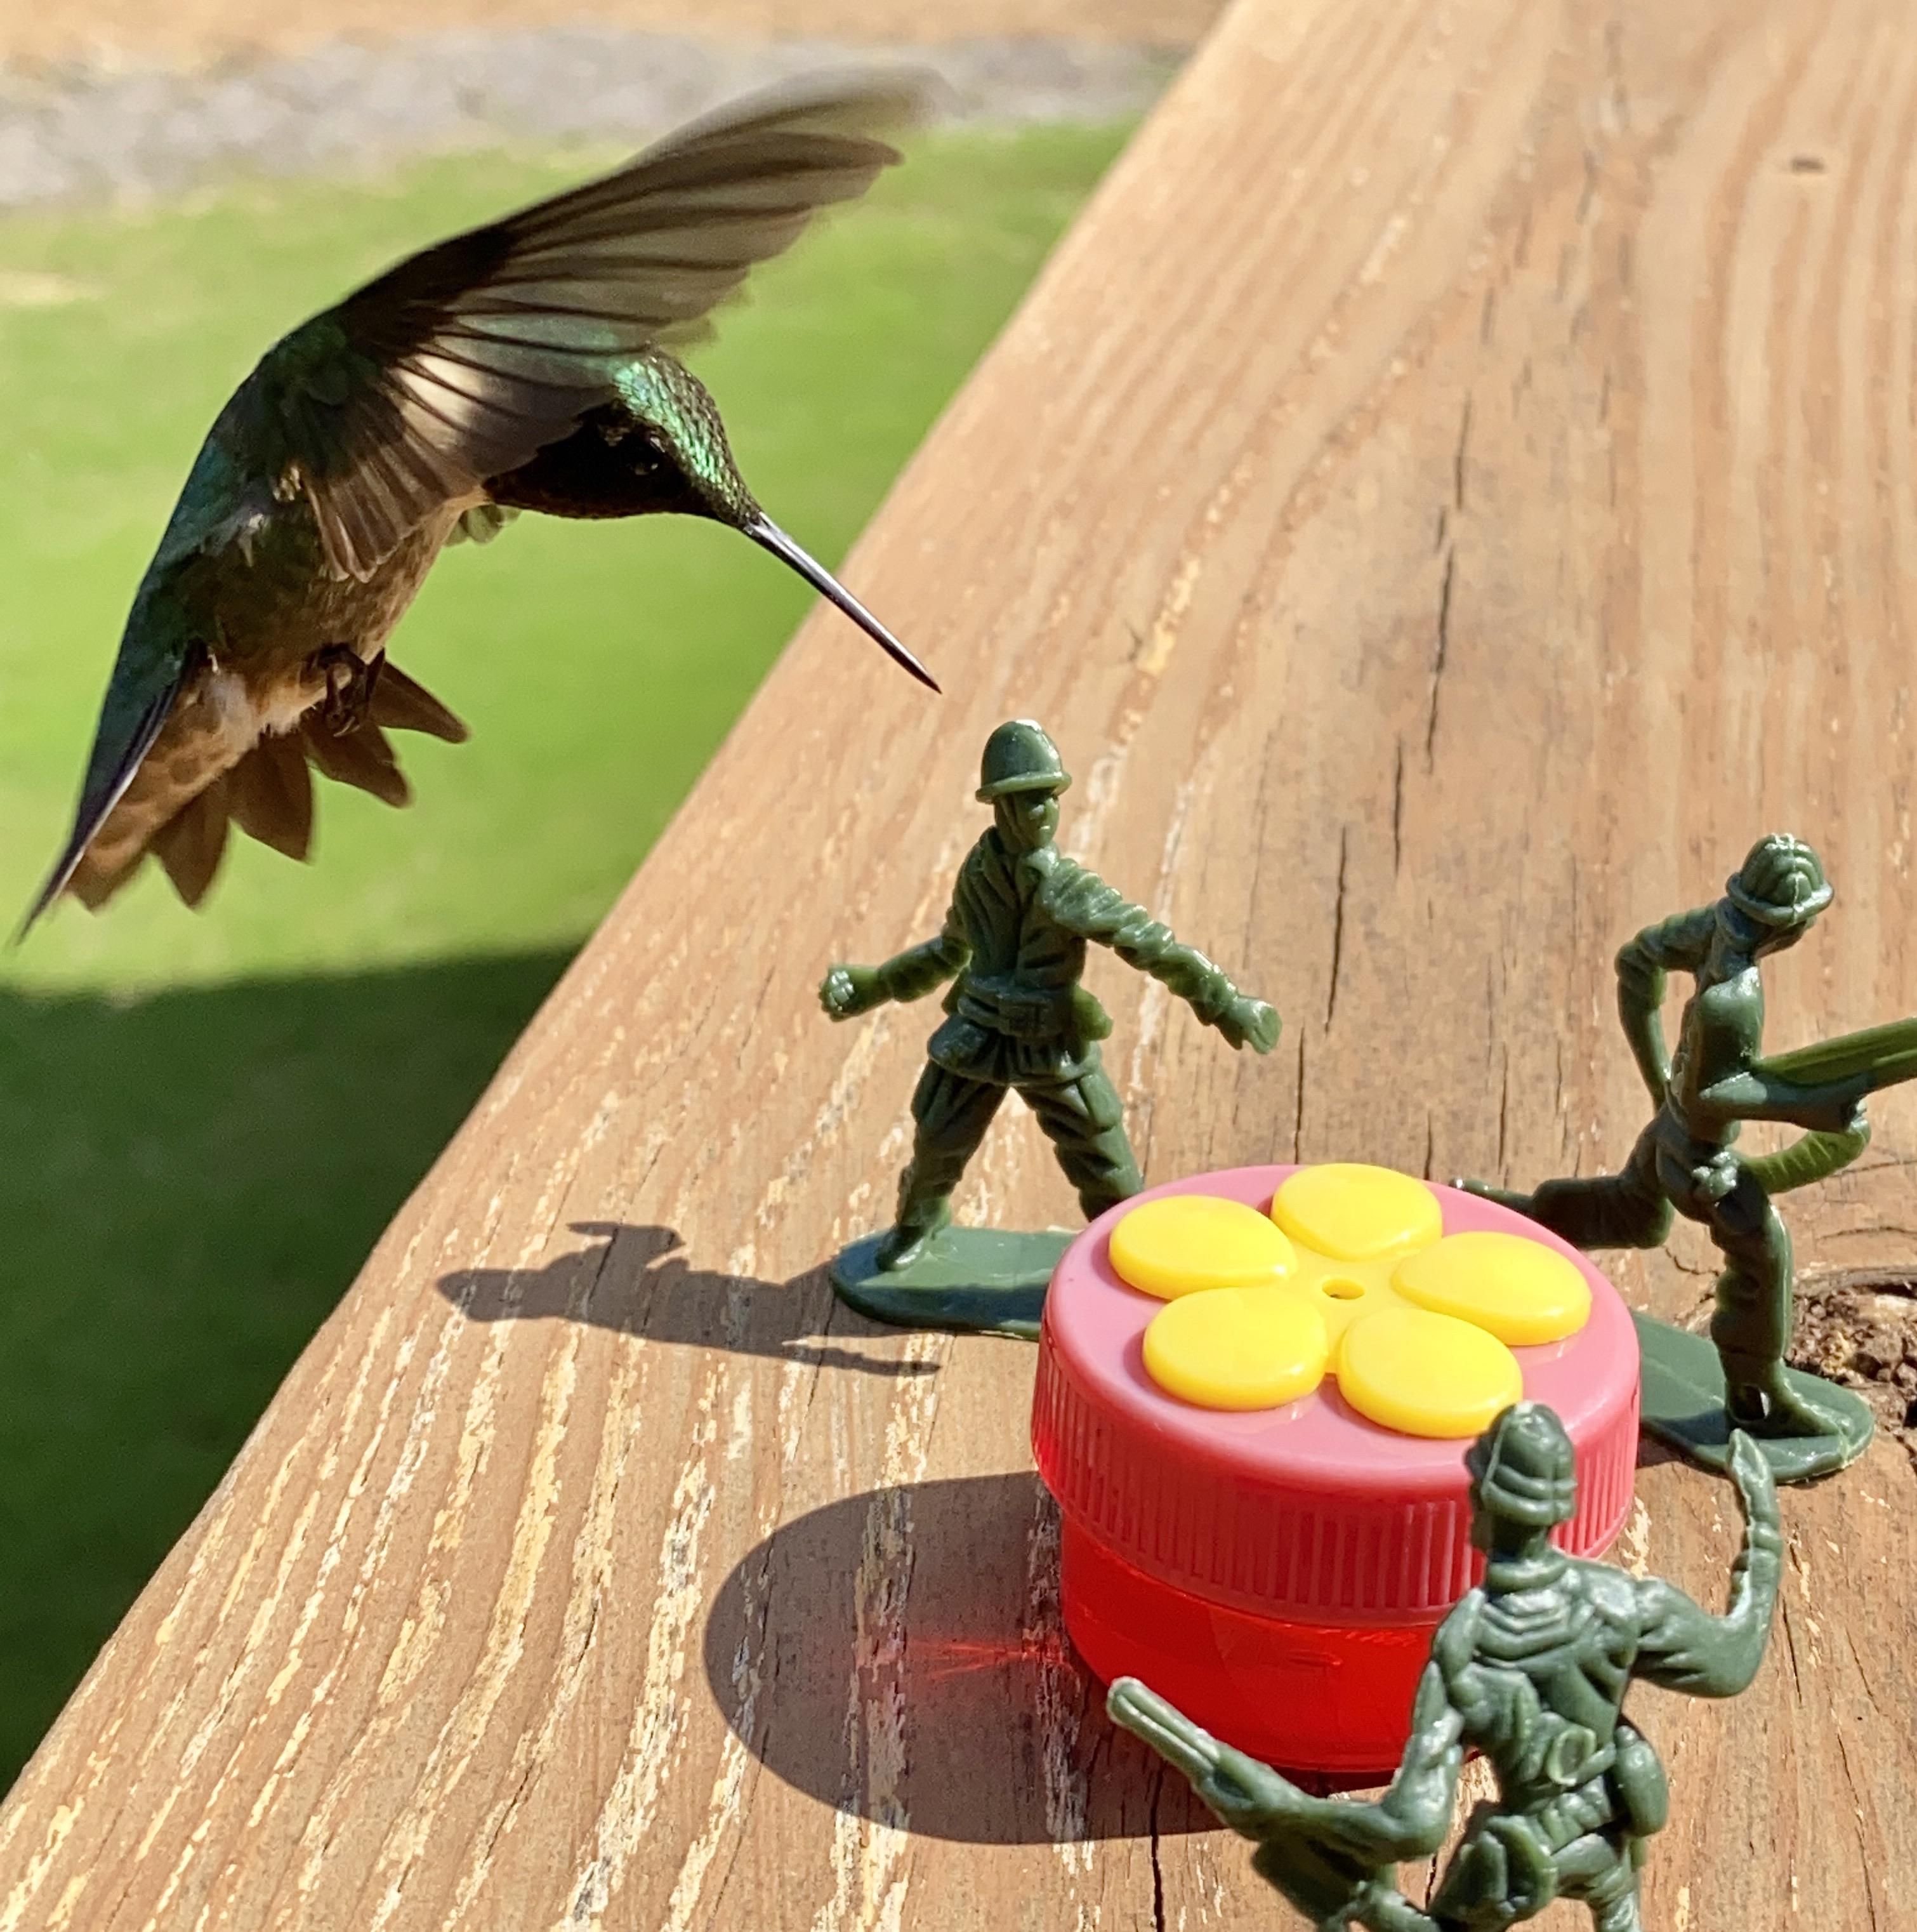 I put some Army men by my hummingbird feeder. The result was even better than anticipated.